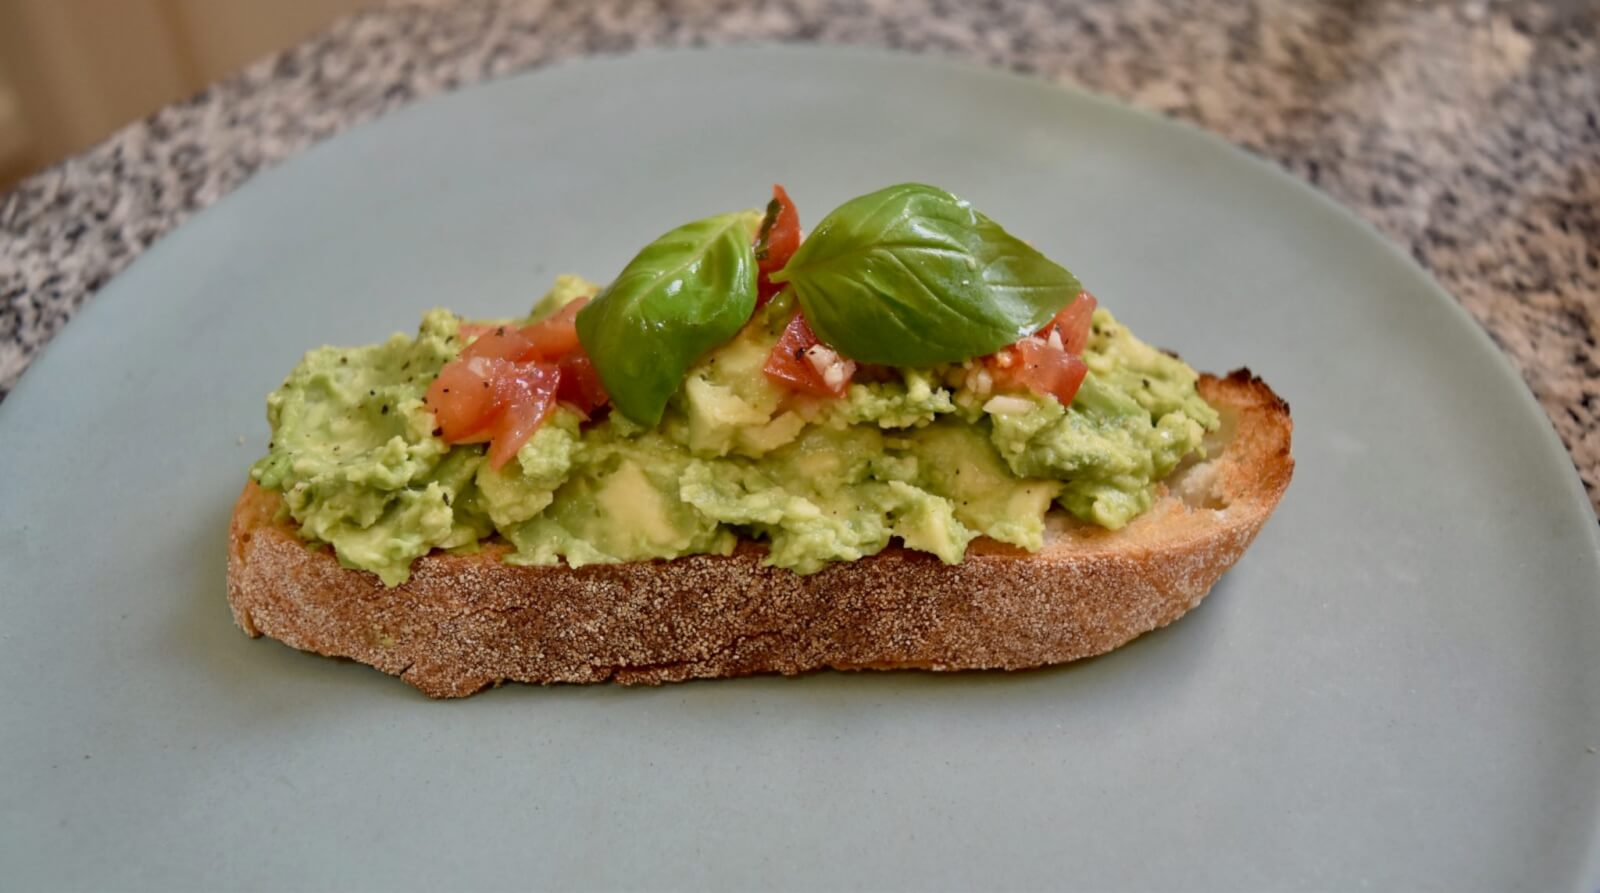 smashed avocado on toast served with basil and tomato